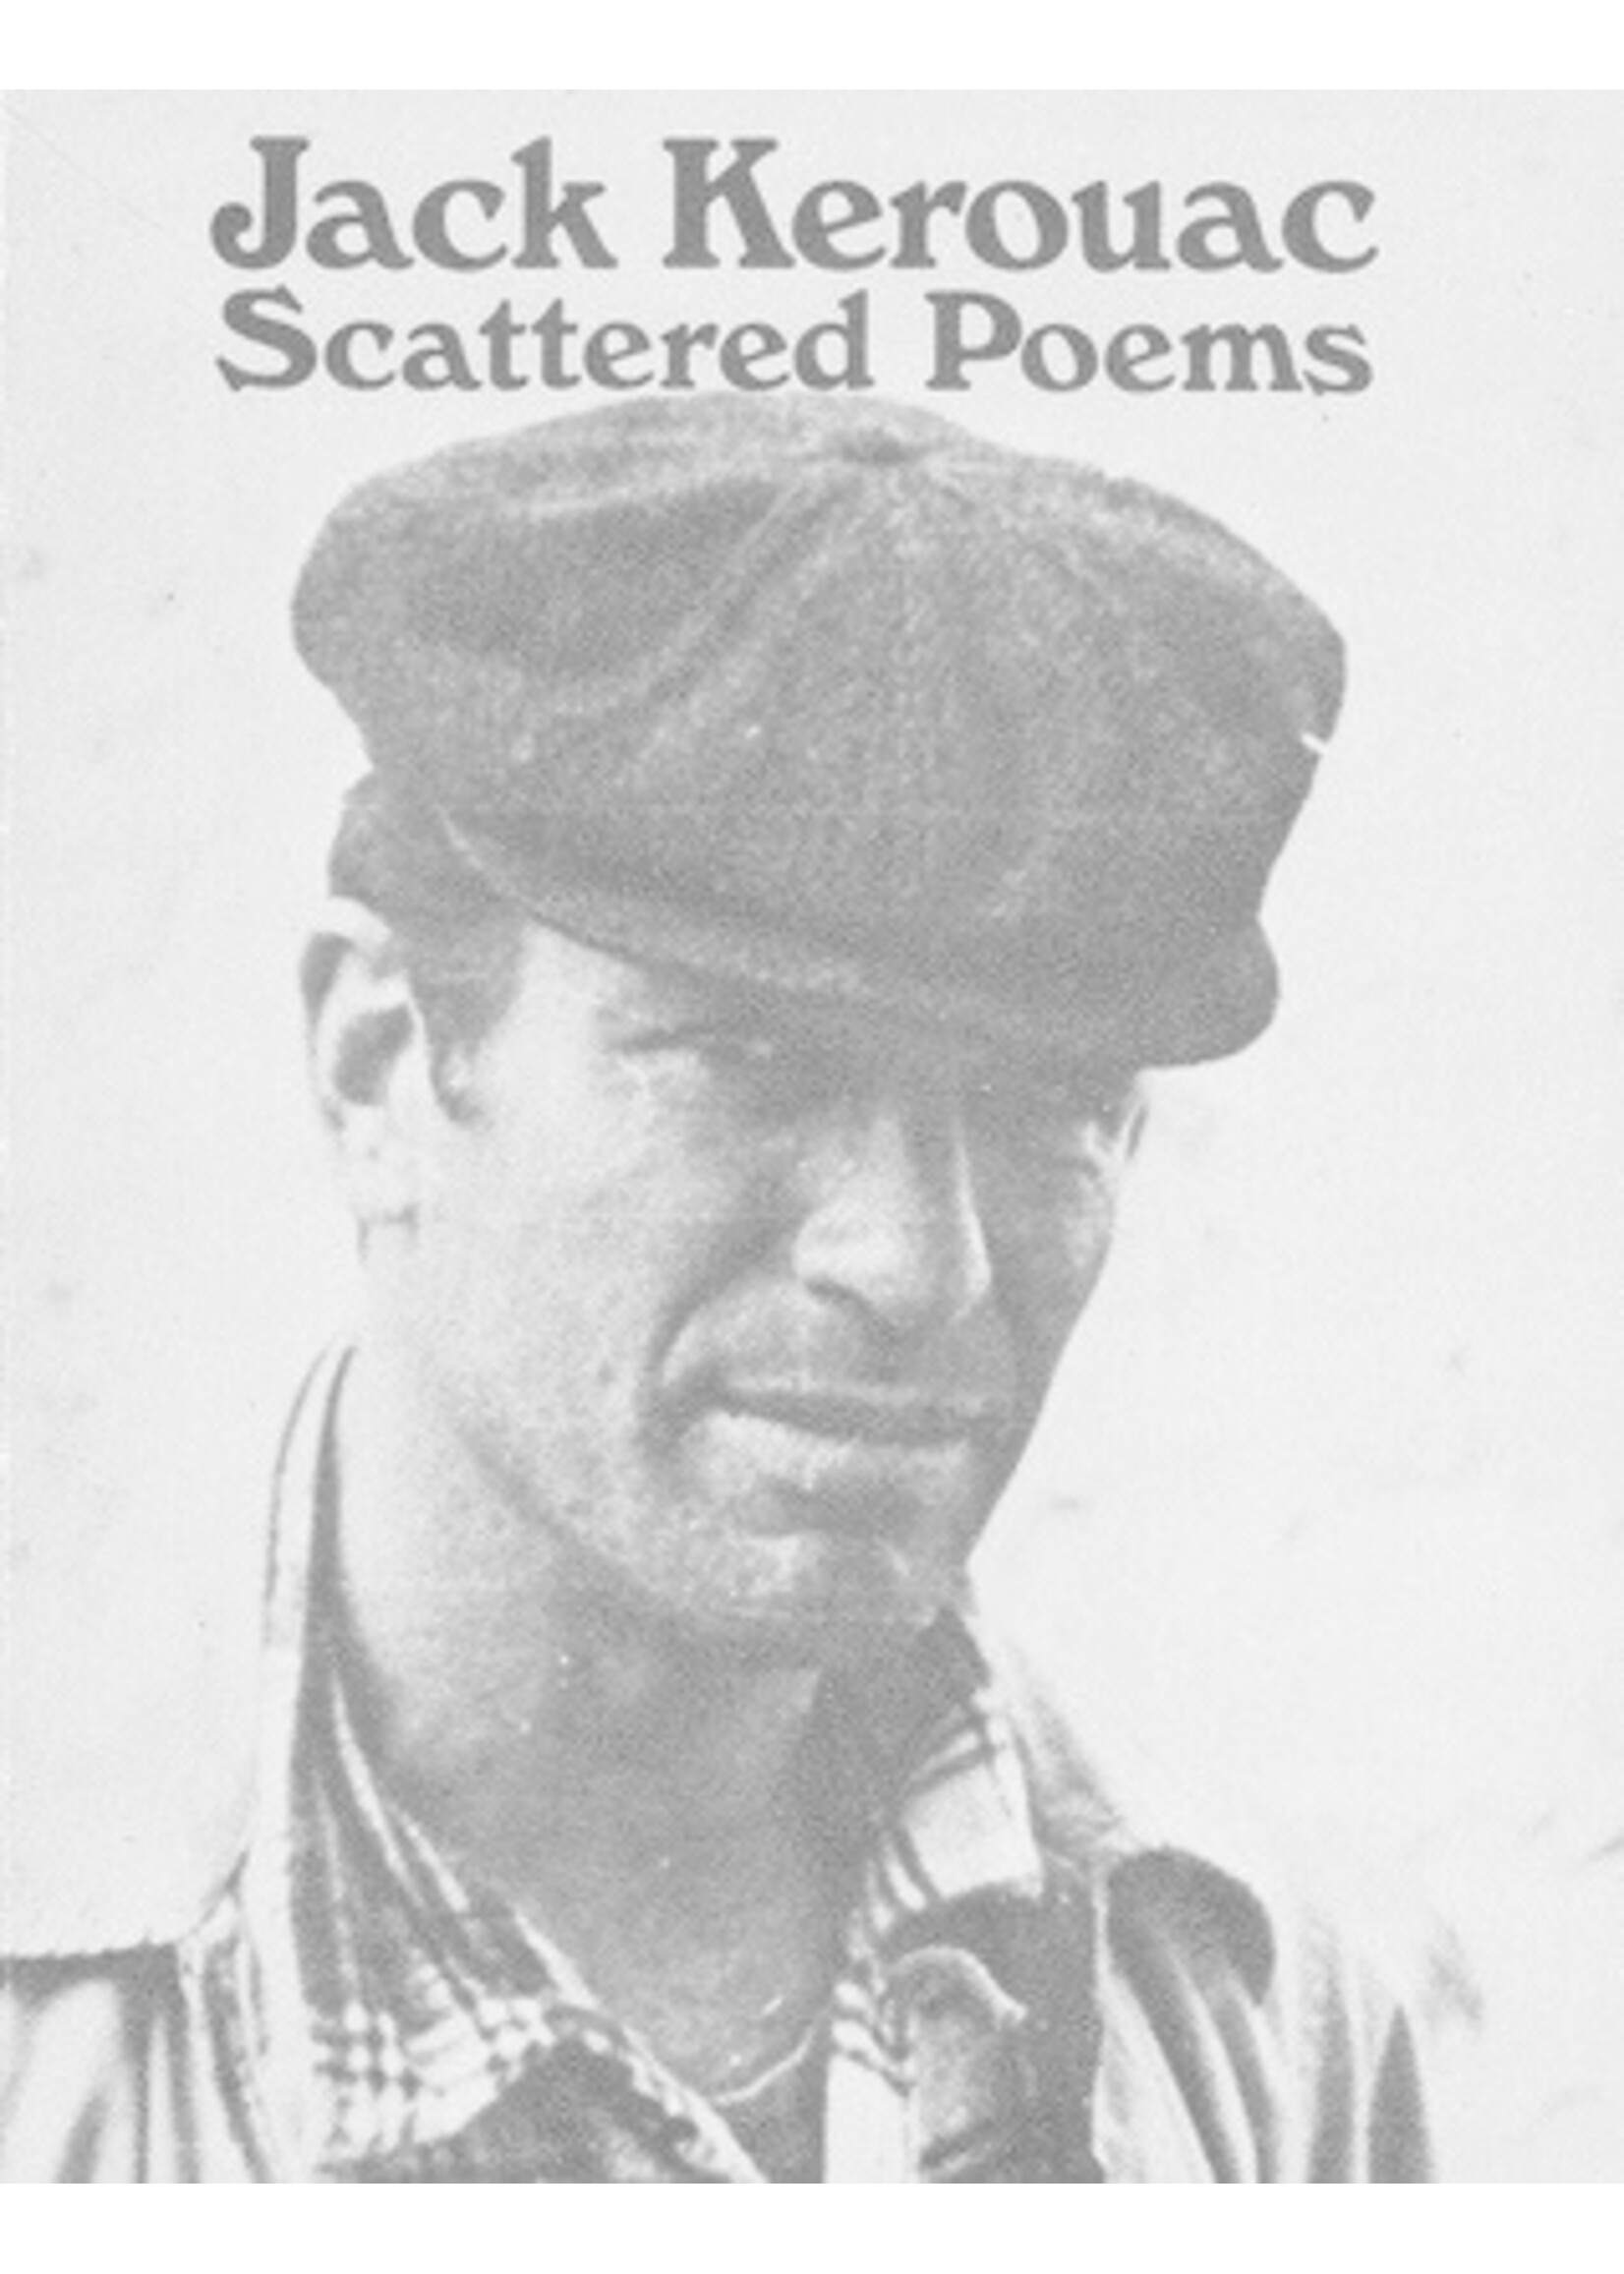 Scattered Poems by Jack Kerouac